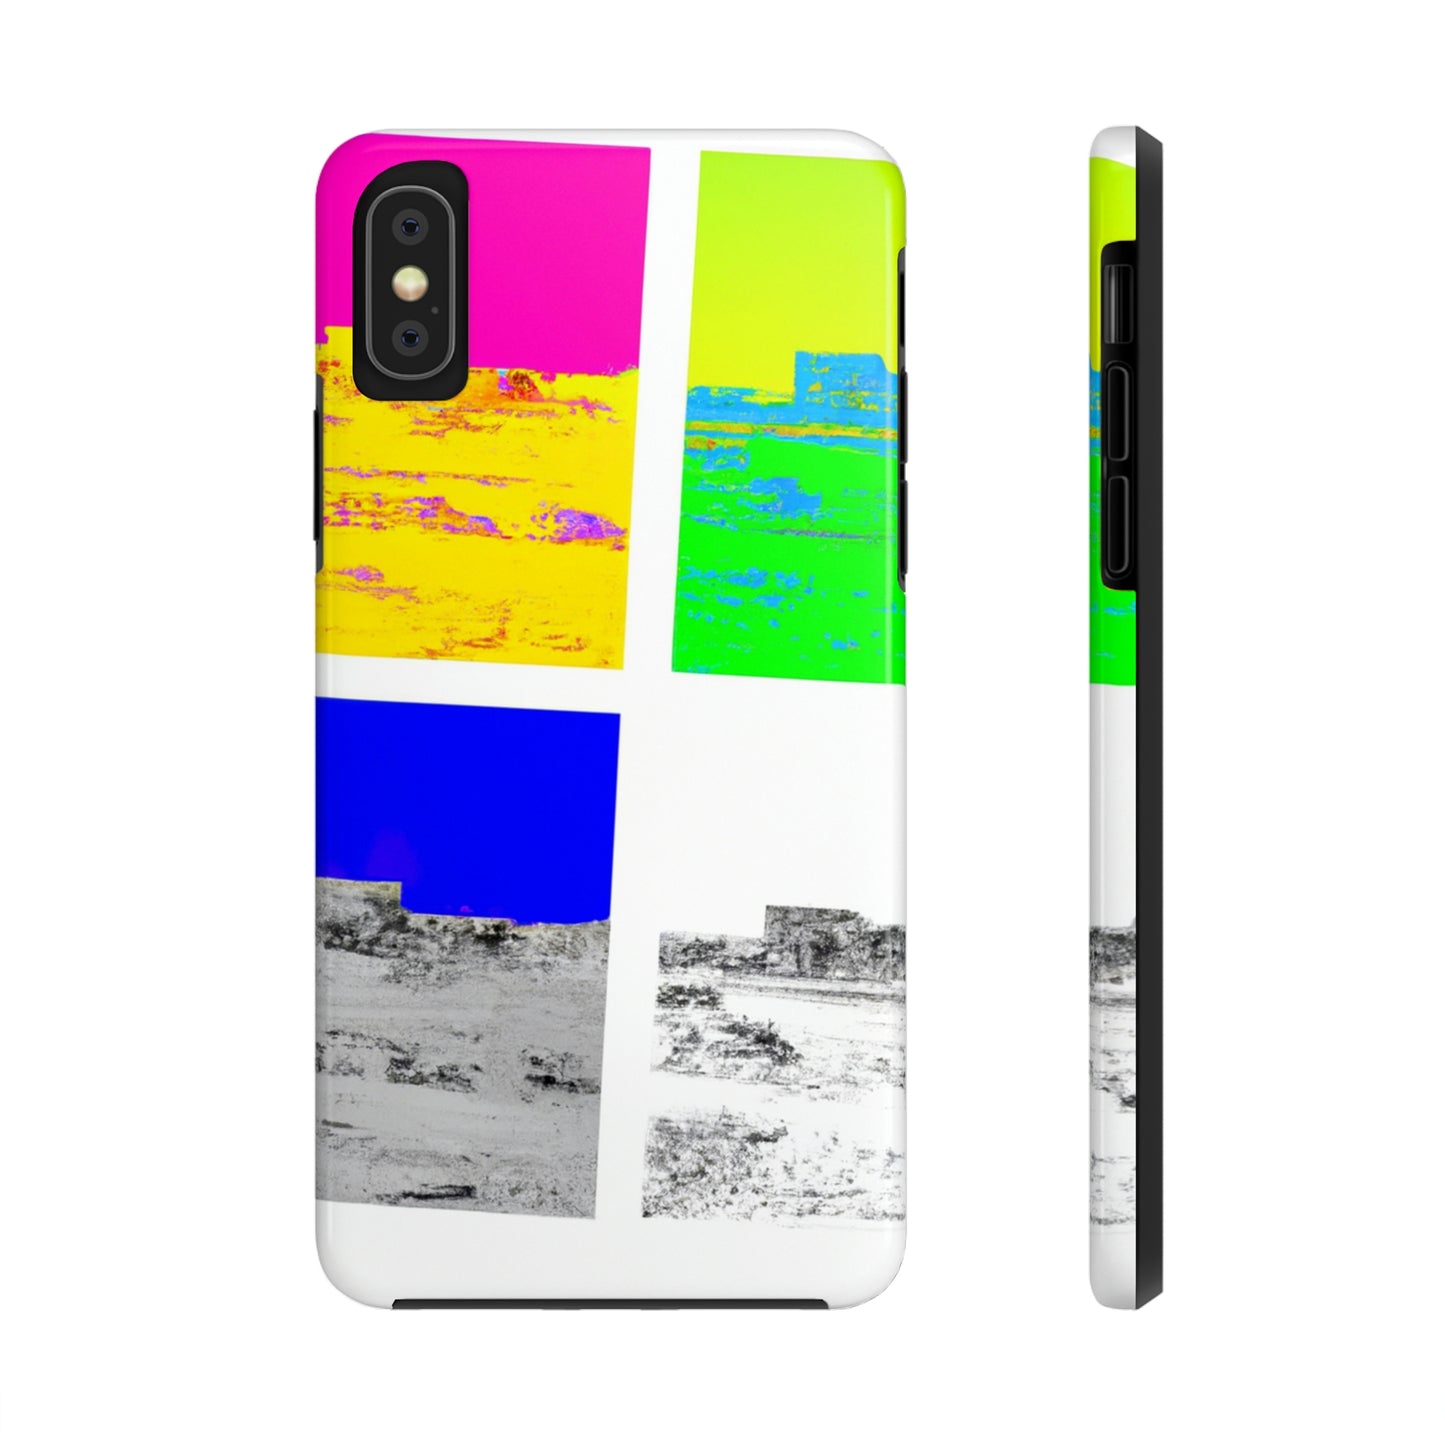 "The Forgotten Oasis: The Lost City of the Desert." - The Alien Tough Phone Cases